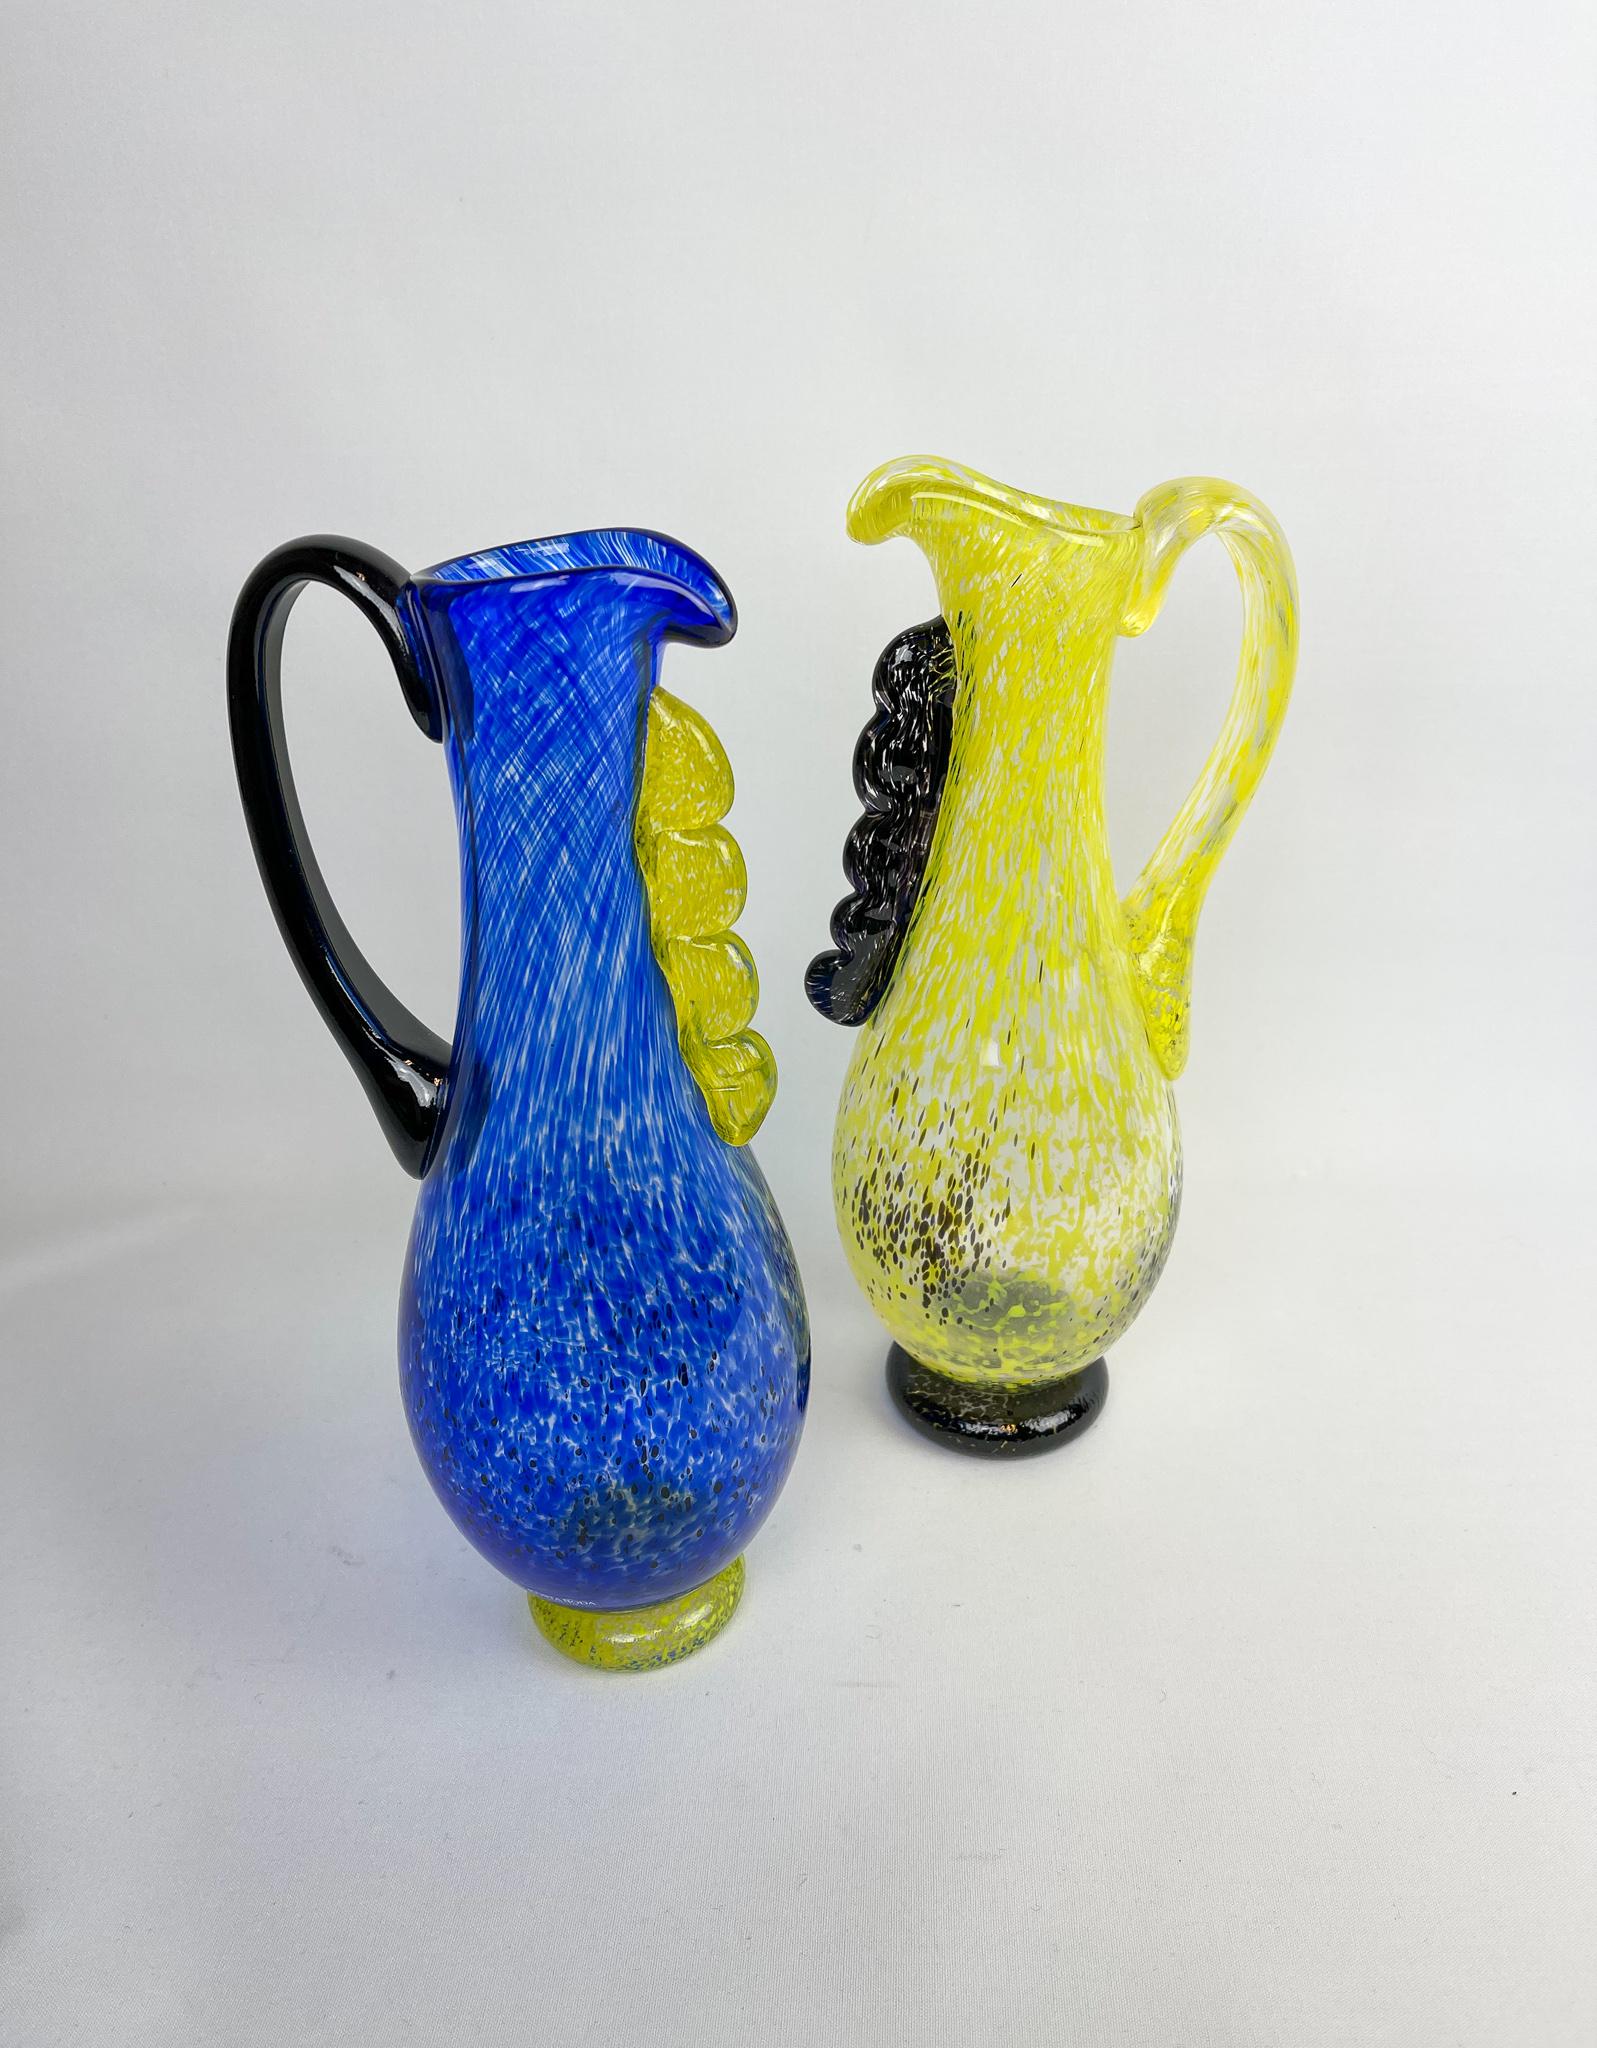 A pair of art glass vases designed by Ann Wåhlström for Kosta, Sweden. They both have lines and color that gives associations to the Swedish flag. Nicely sculptured and can be used as a jug, vase or of course just in decorations purpose.

Nice